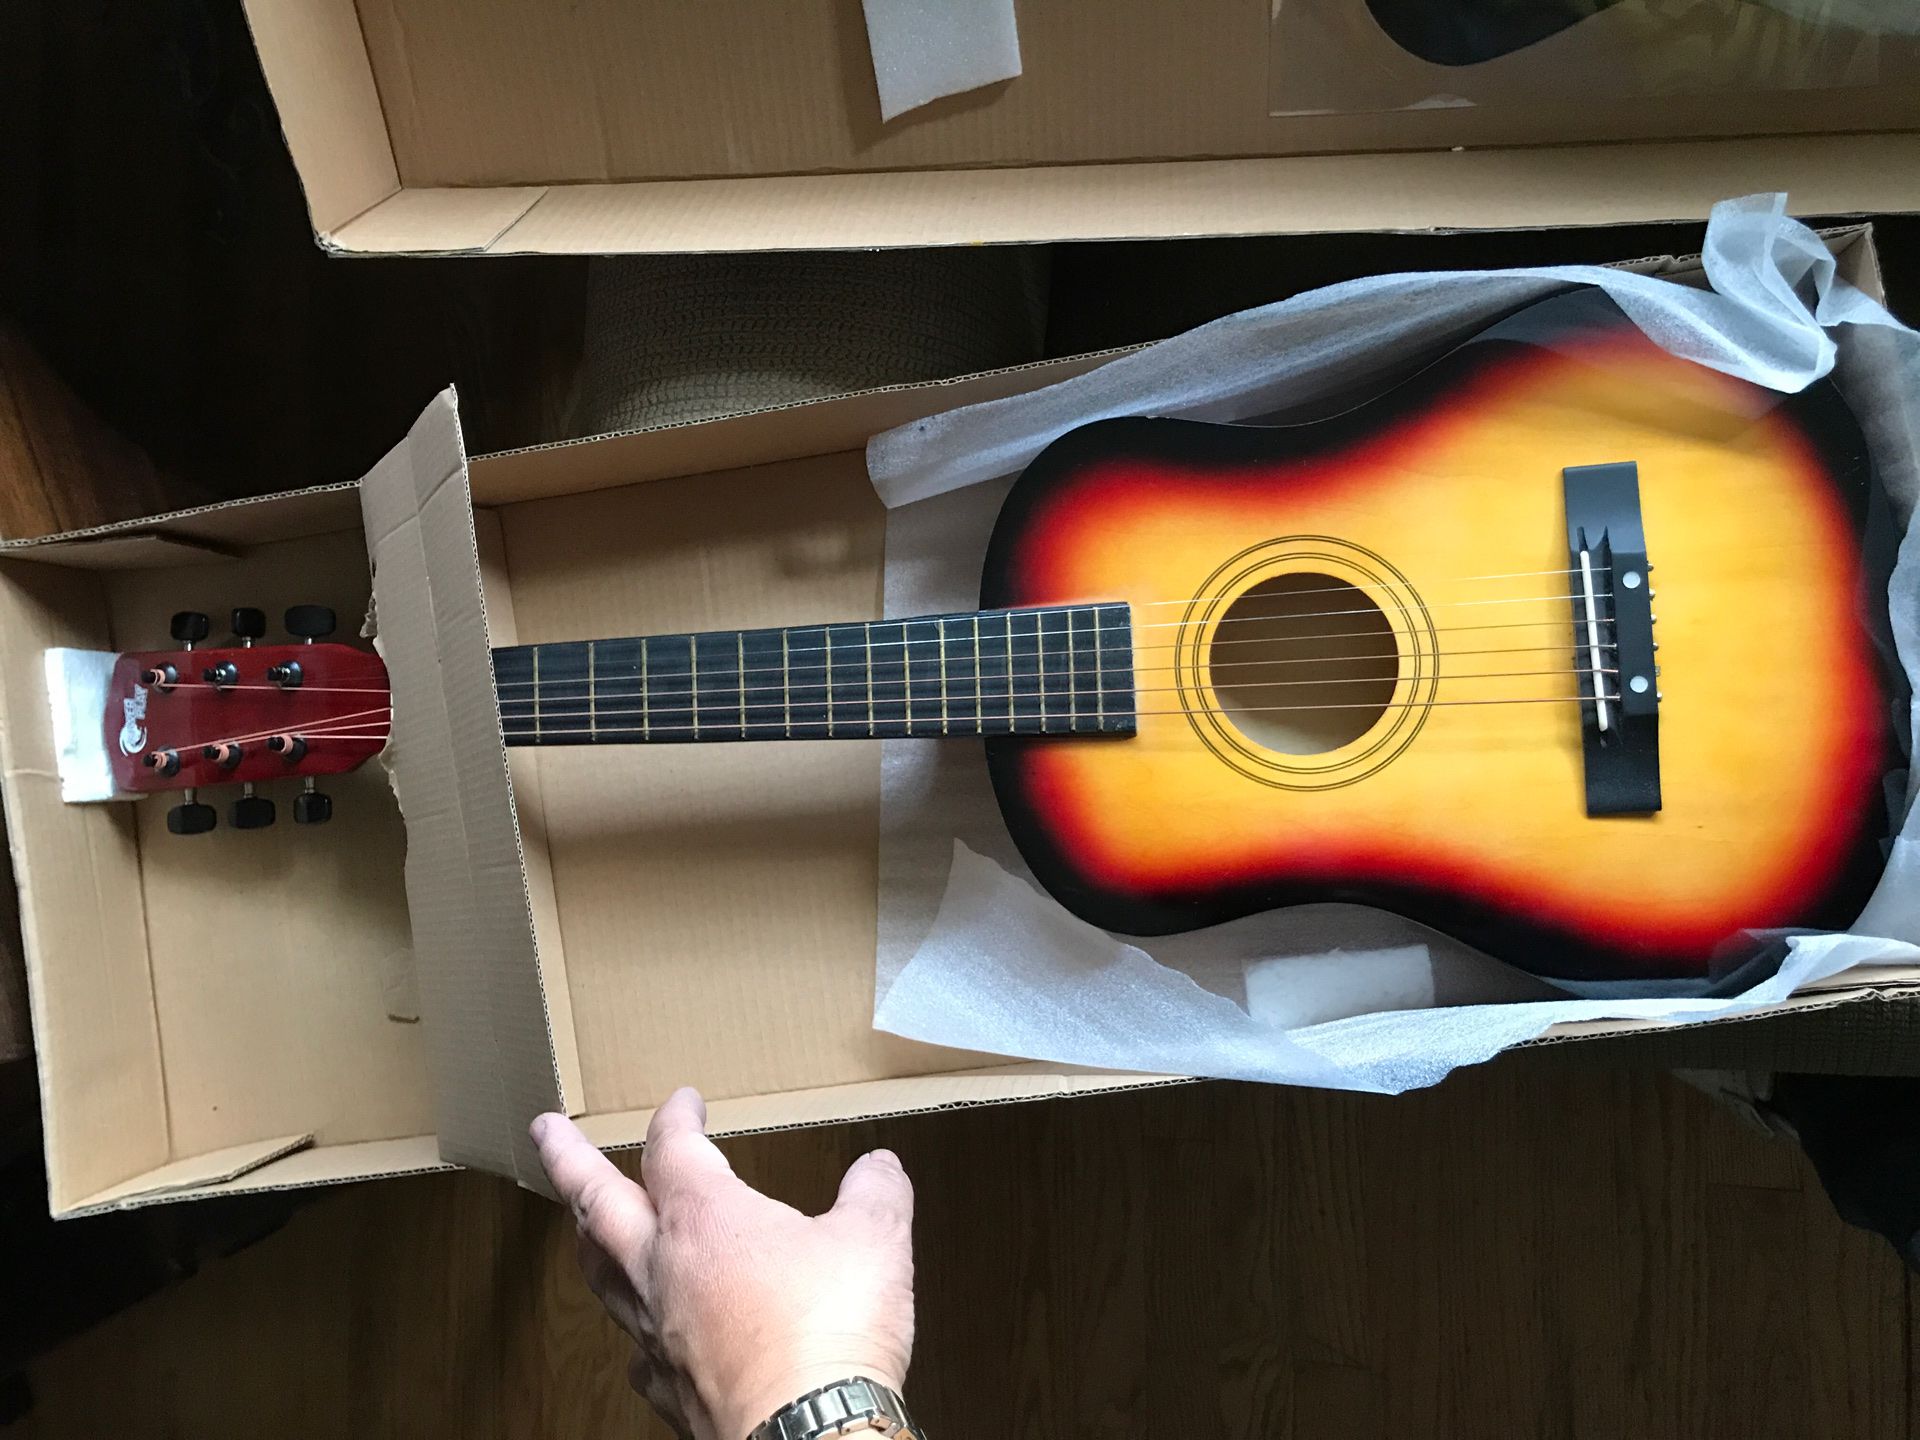 Child’s First Guitar by Powerplay